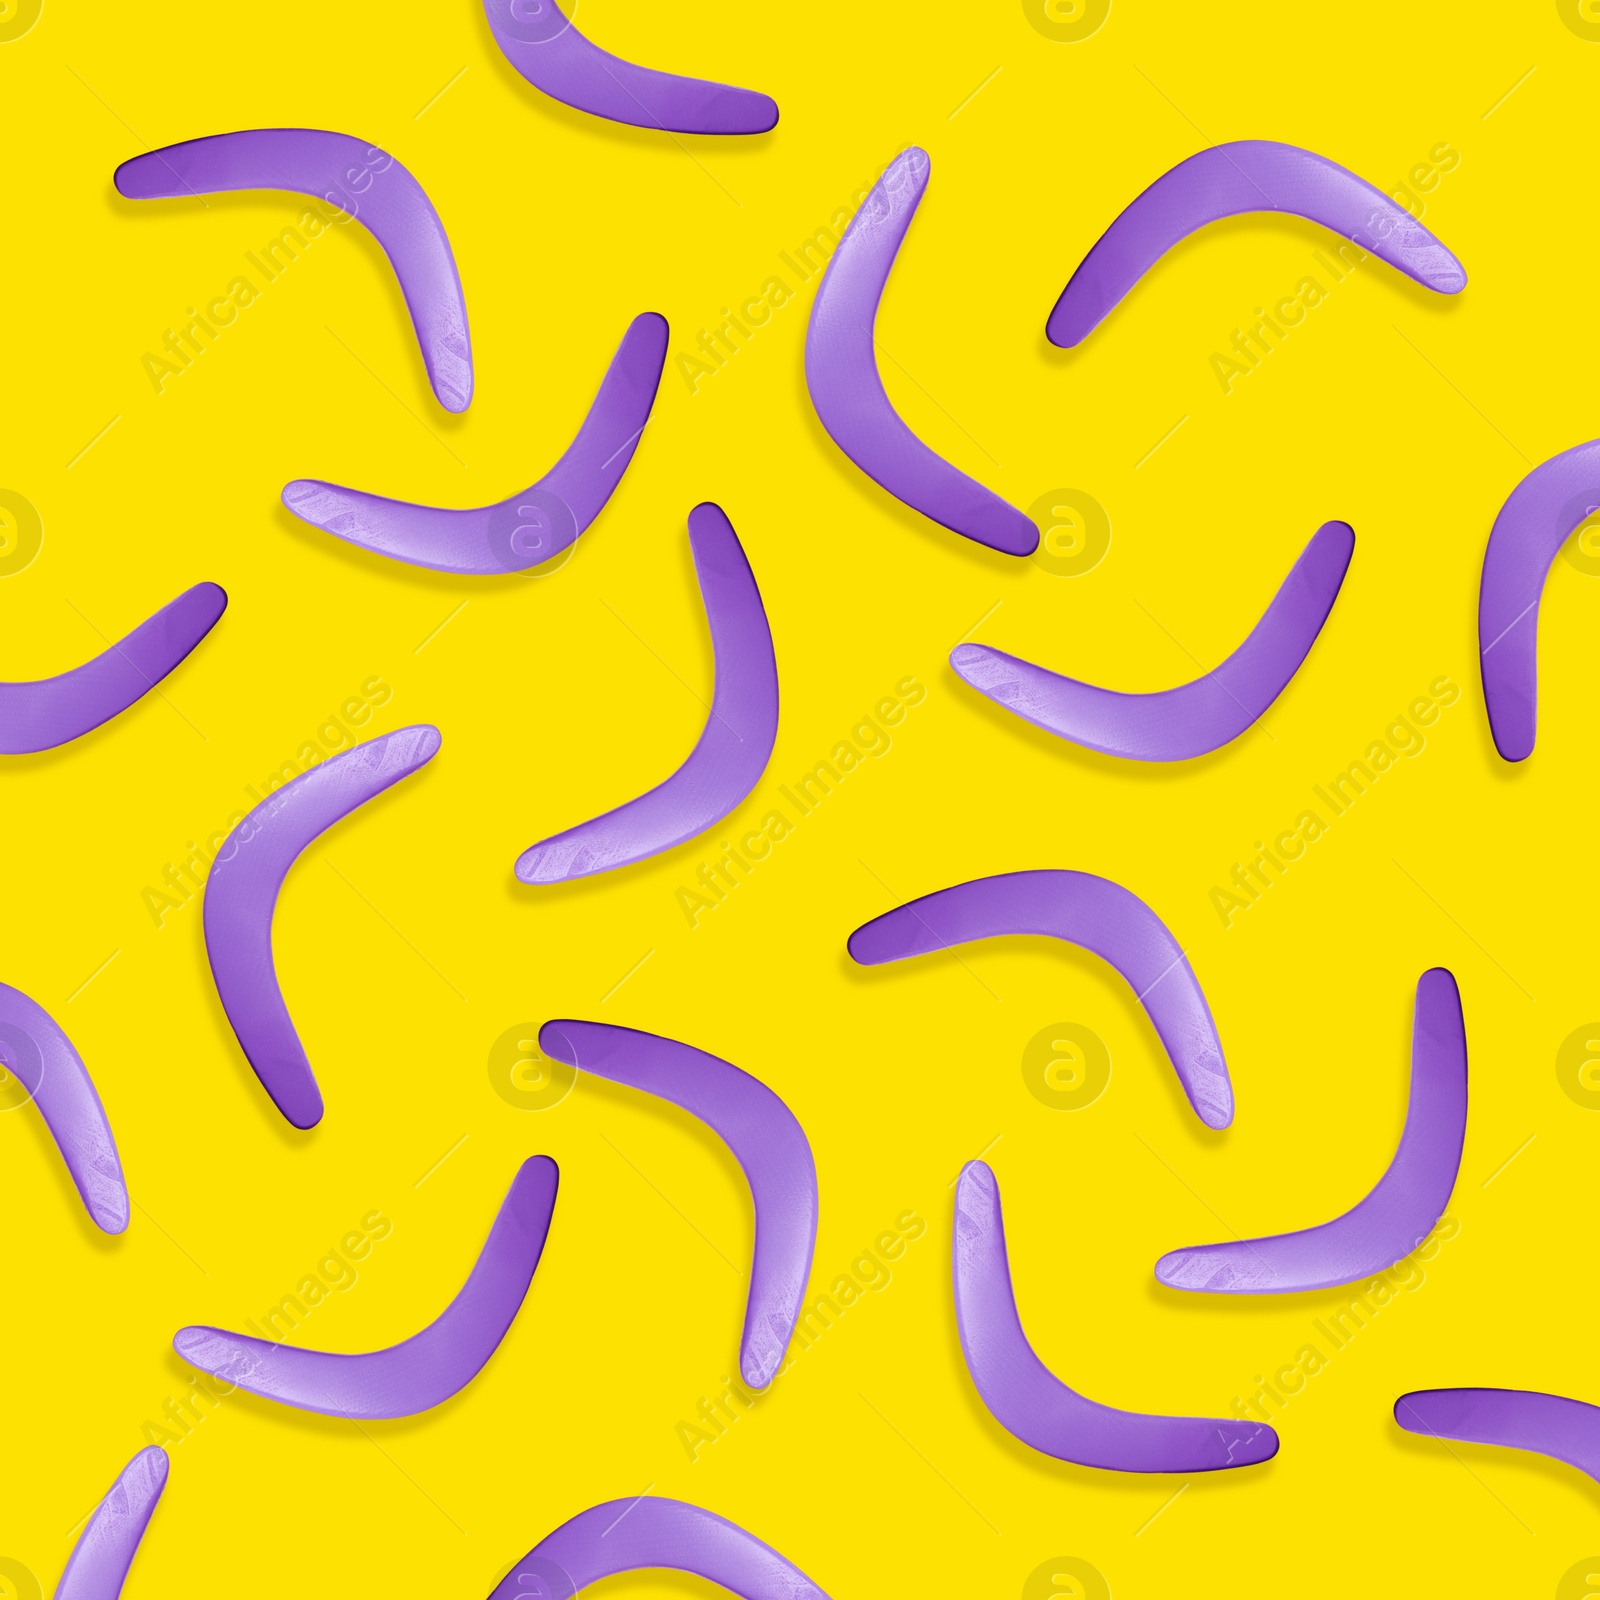 Image of Violet boomerangs on yellow background, flat lay